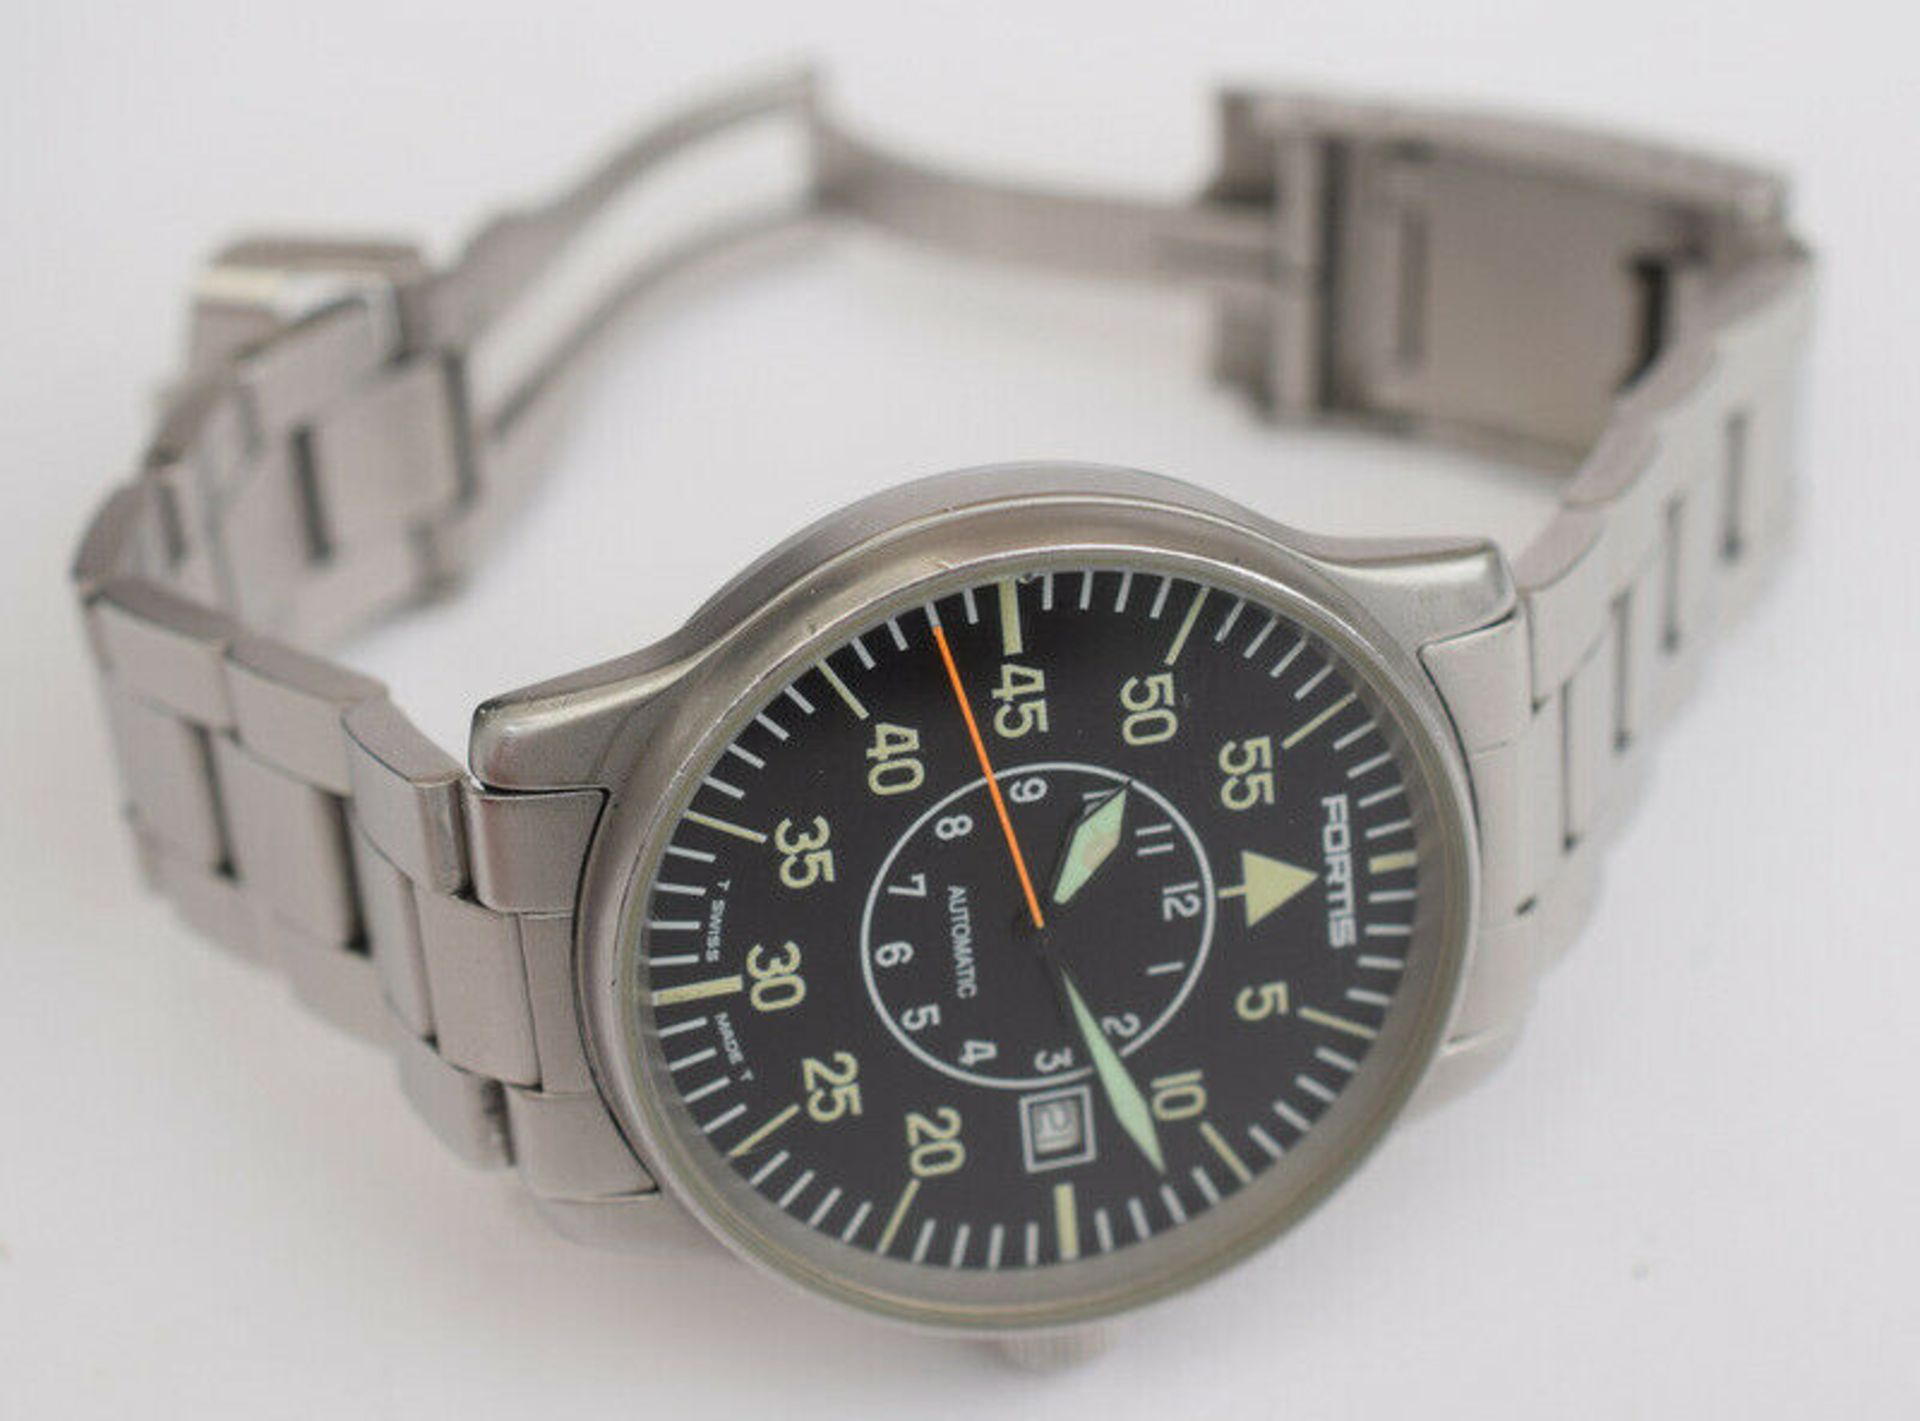 Vintage Fortis Flieger Automatic 595.10.46 Pilot's Watch Full Set - Image 3 of 9